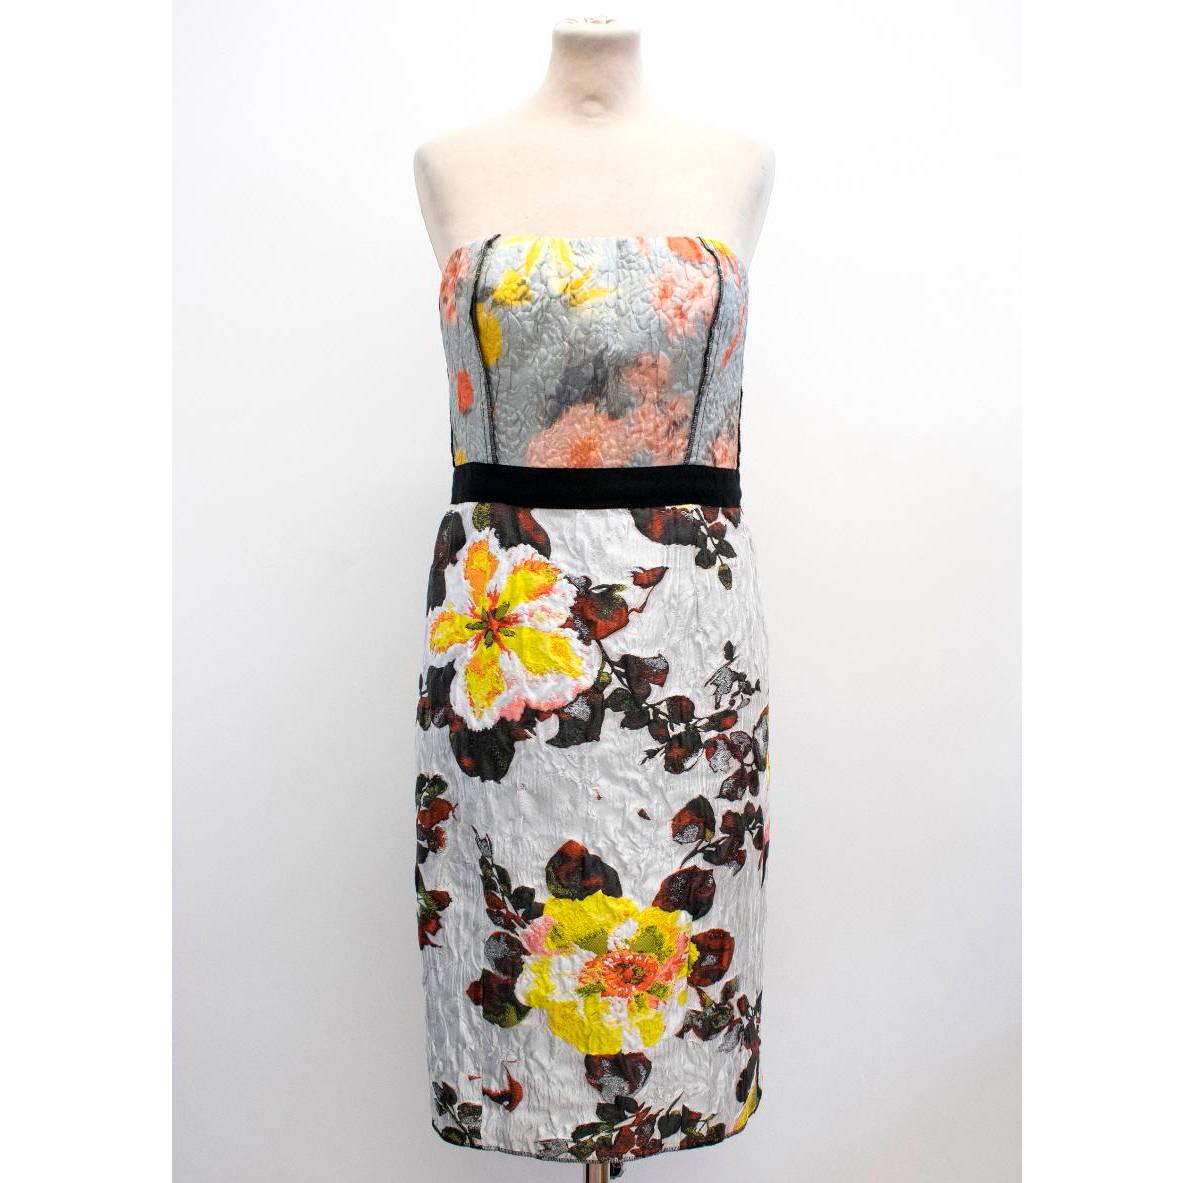 Oscar de la Renta floral strapless dress in a fitted knee-length style with corset bodice. In a textured medium-weight silk-wool blend with an all-over print. 

Size: US6
Measurements: Approx: Bust: 37cm Waist: 38cm Hips: 44cm Length: